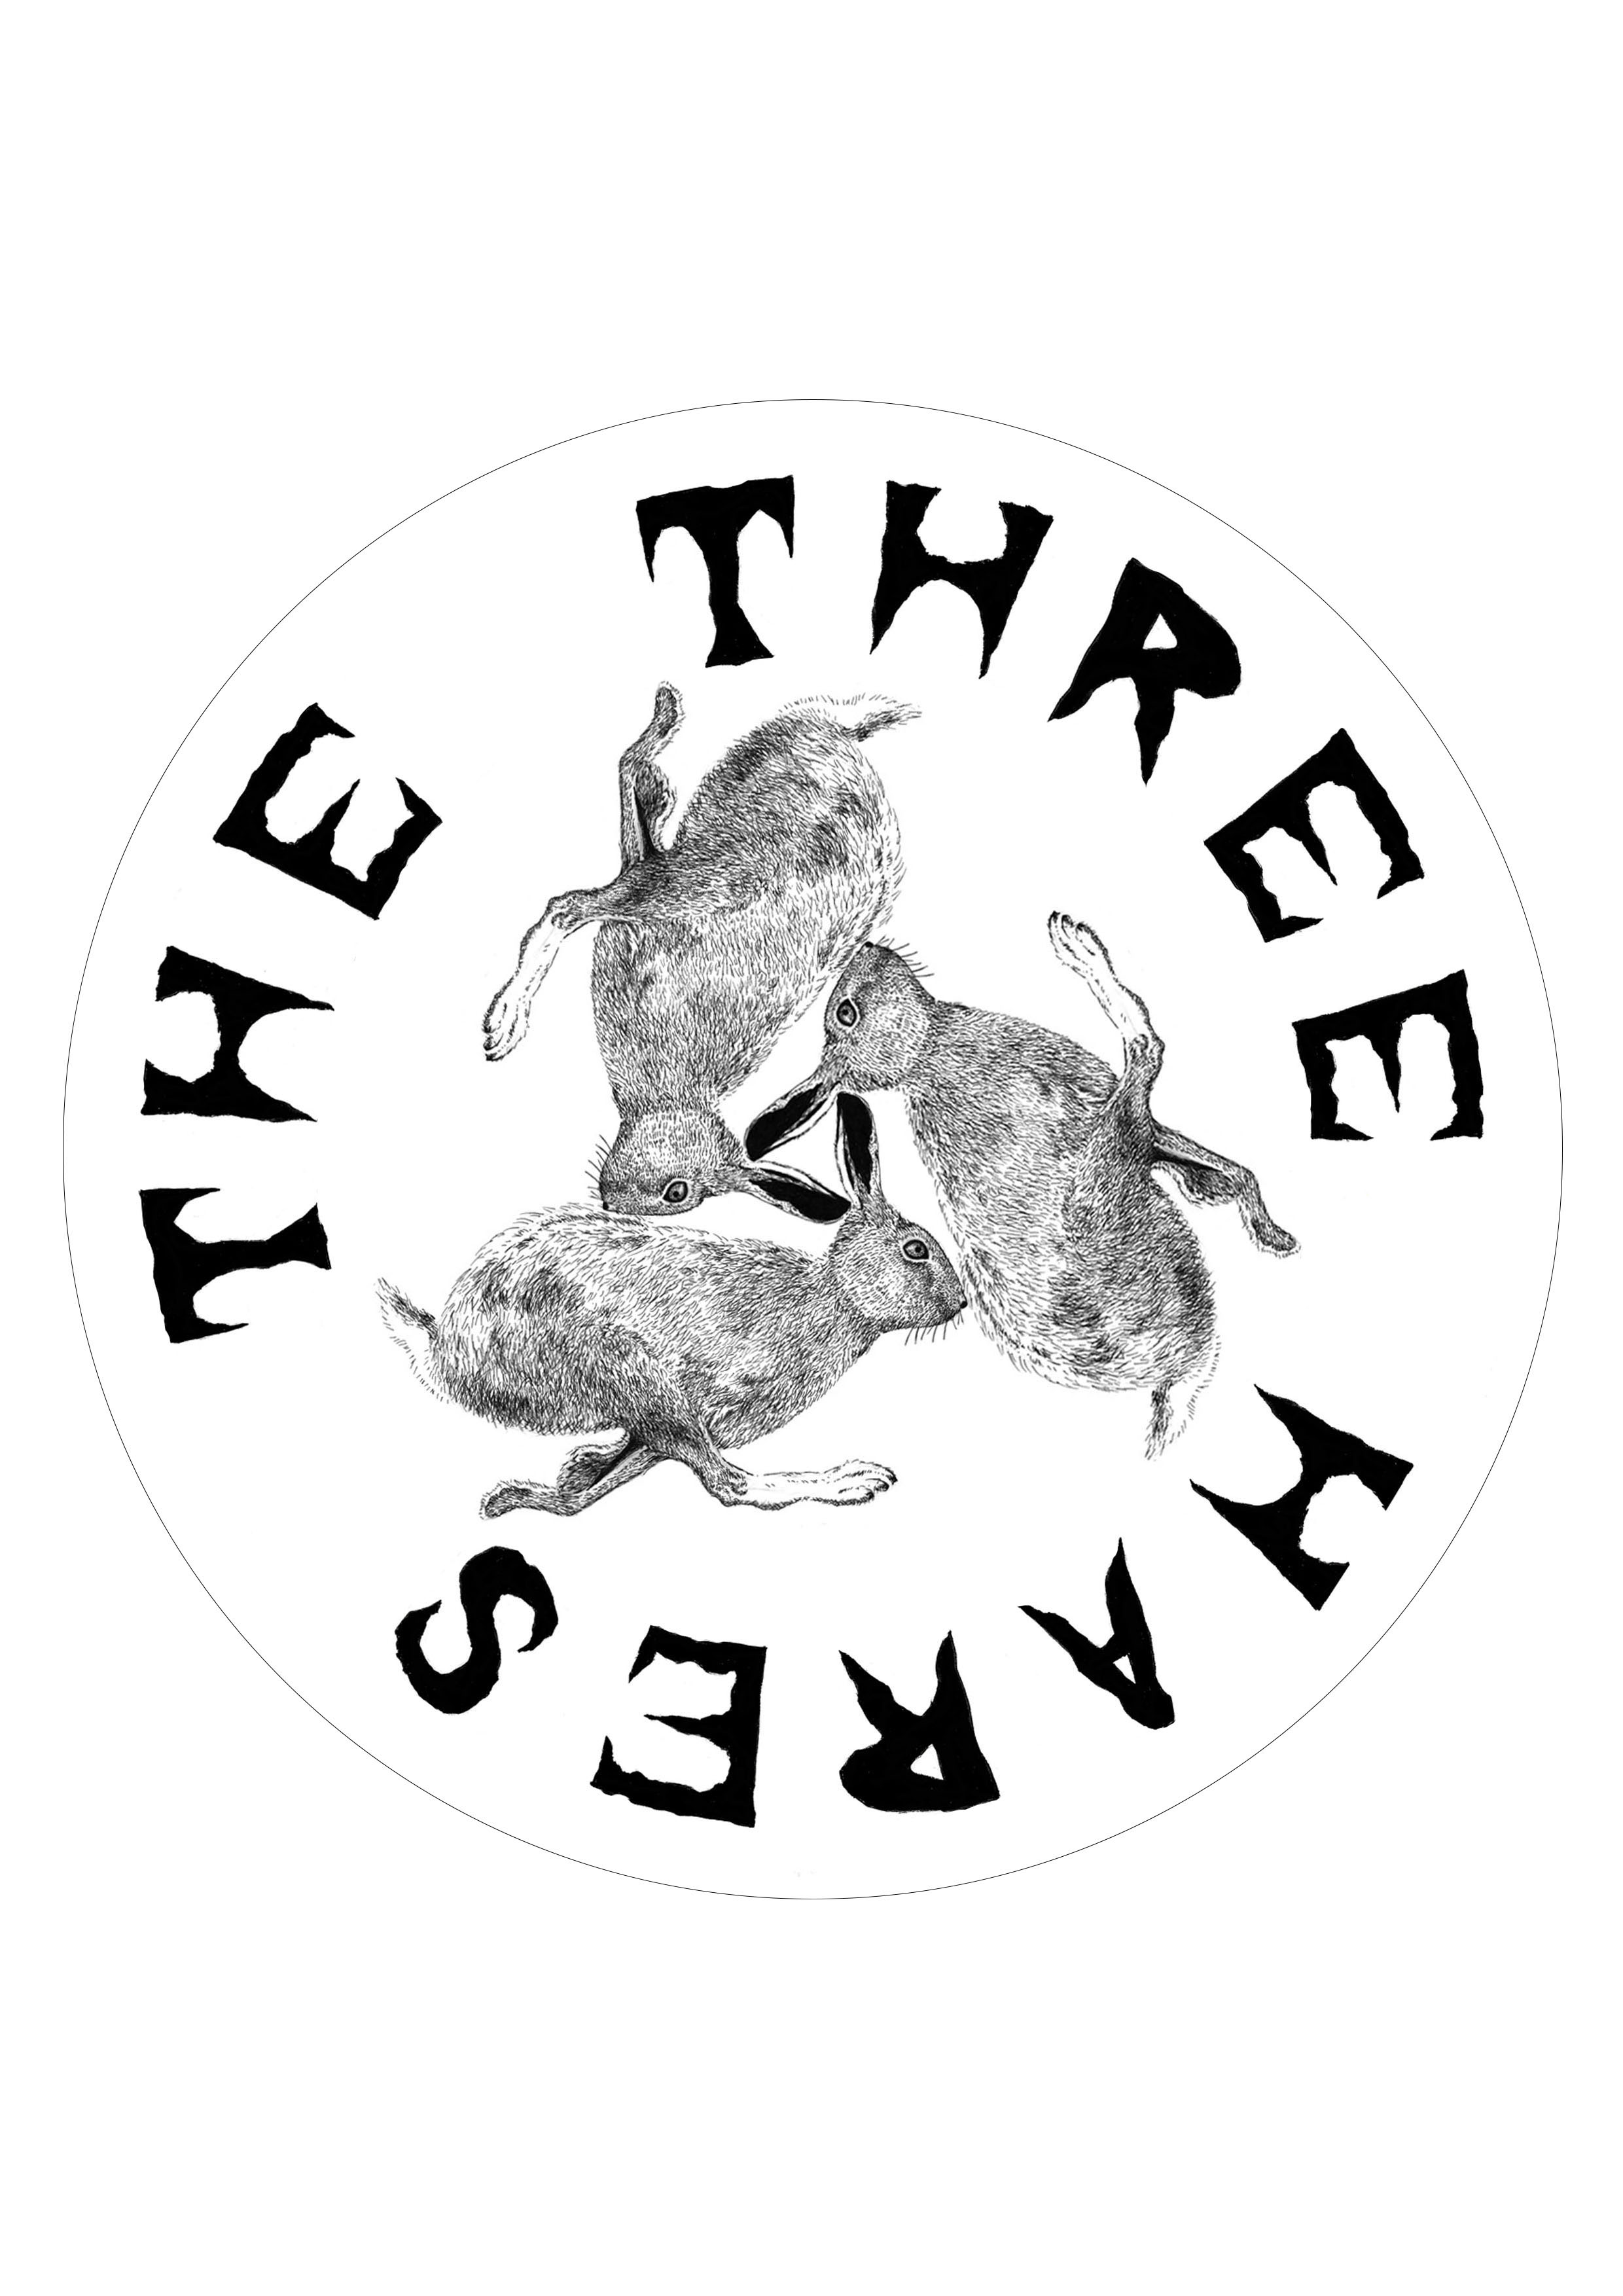 Ethan-Pennell_The-Three-Hares